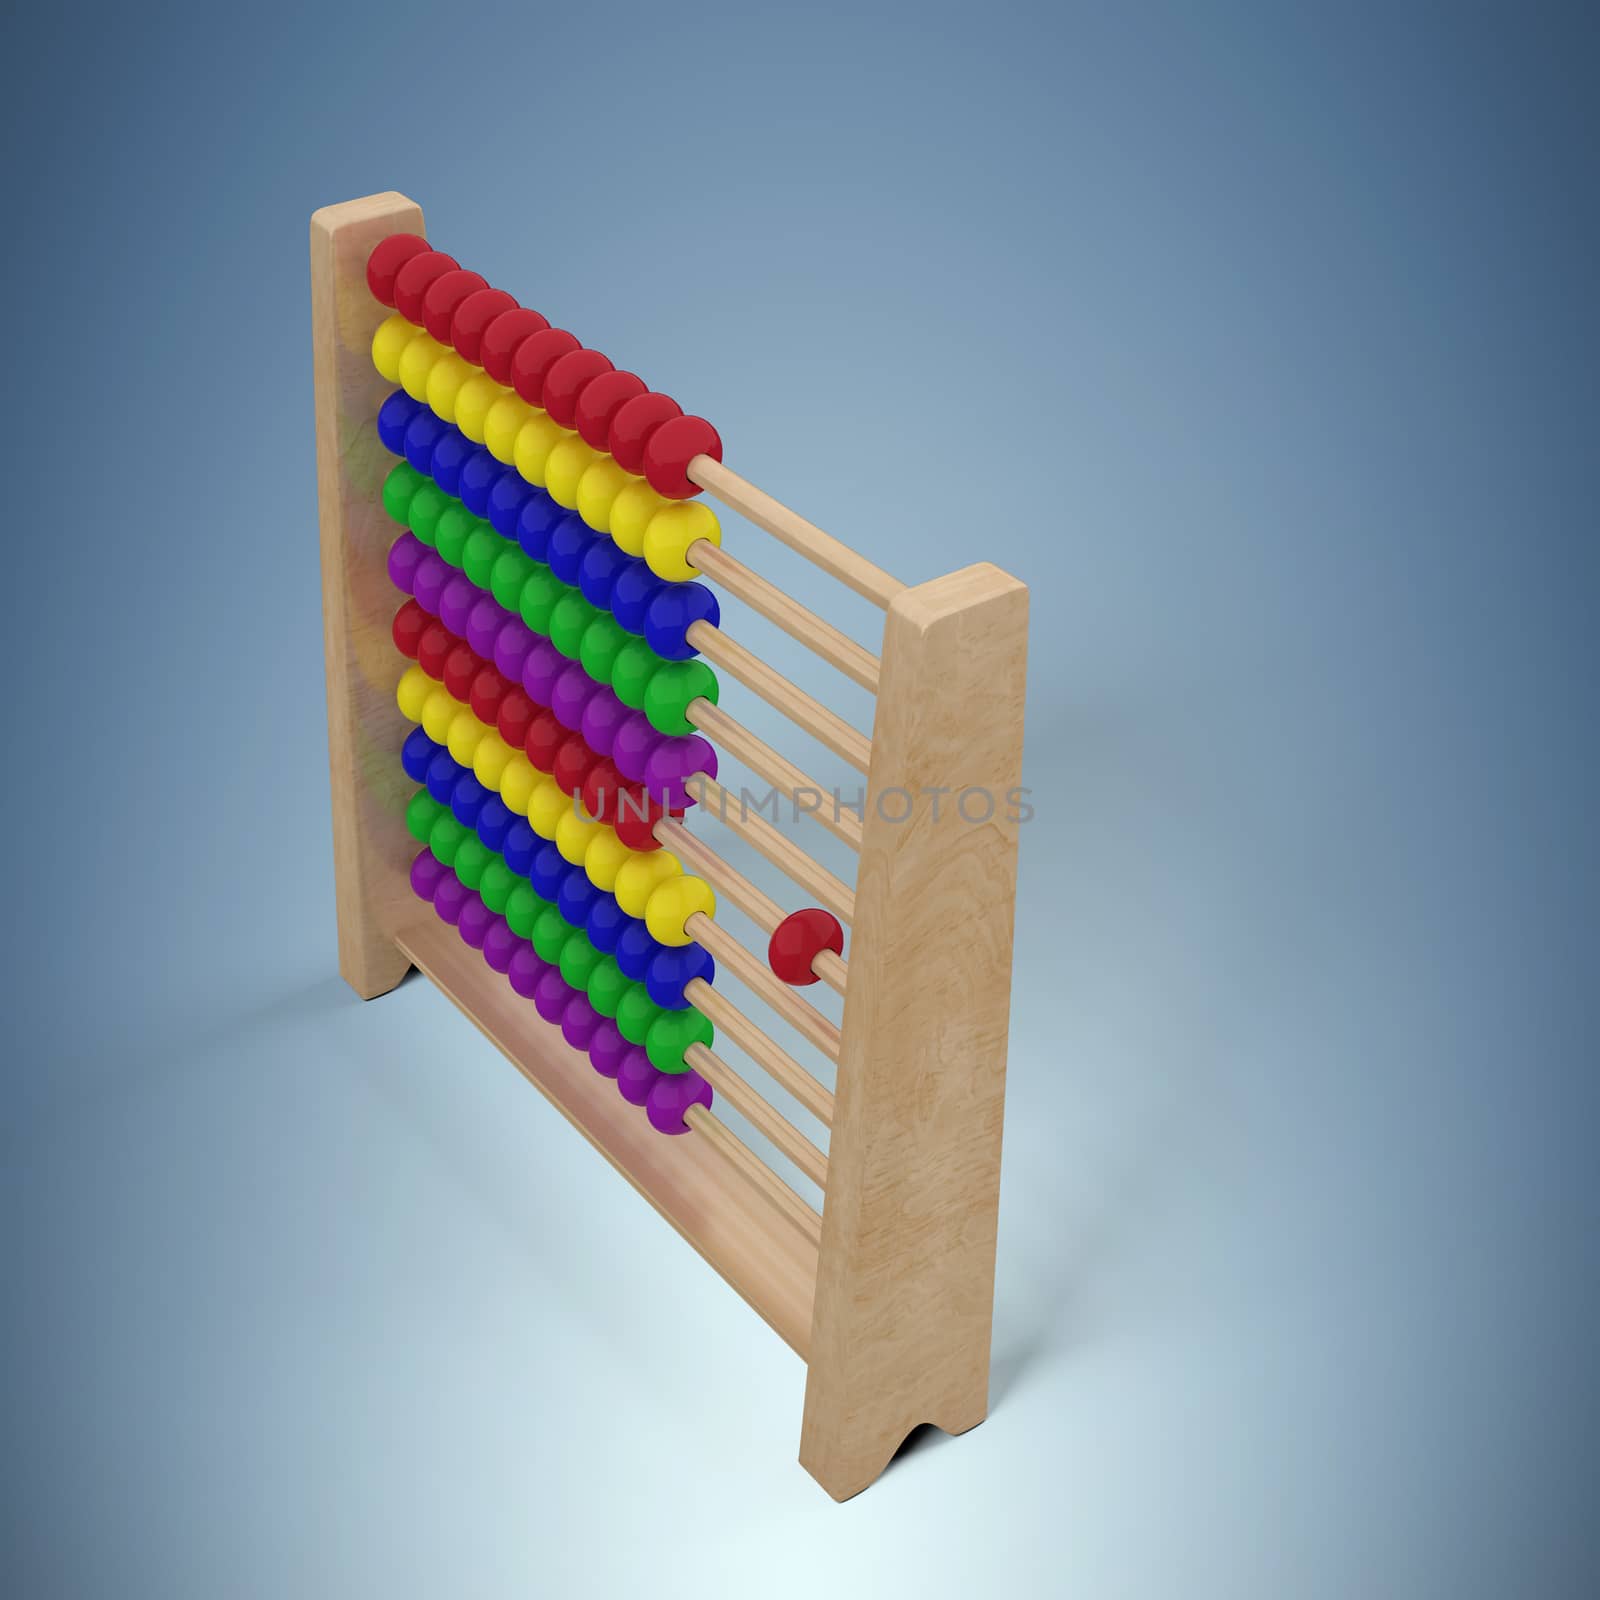 Composite image of composite image of abacus toy by Wavebreakmedia